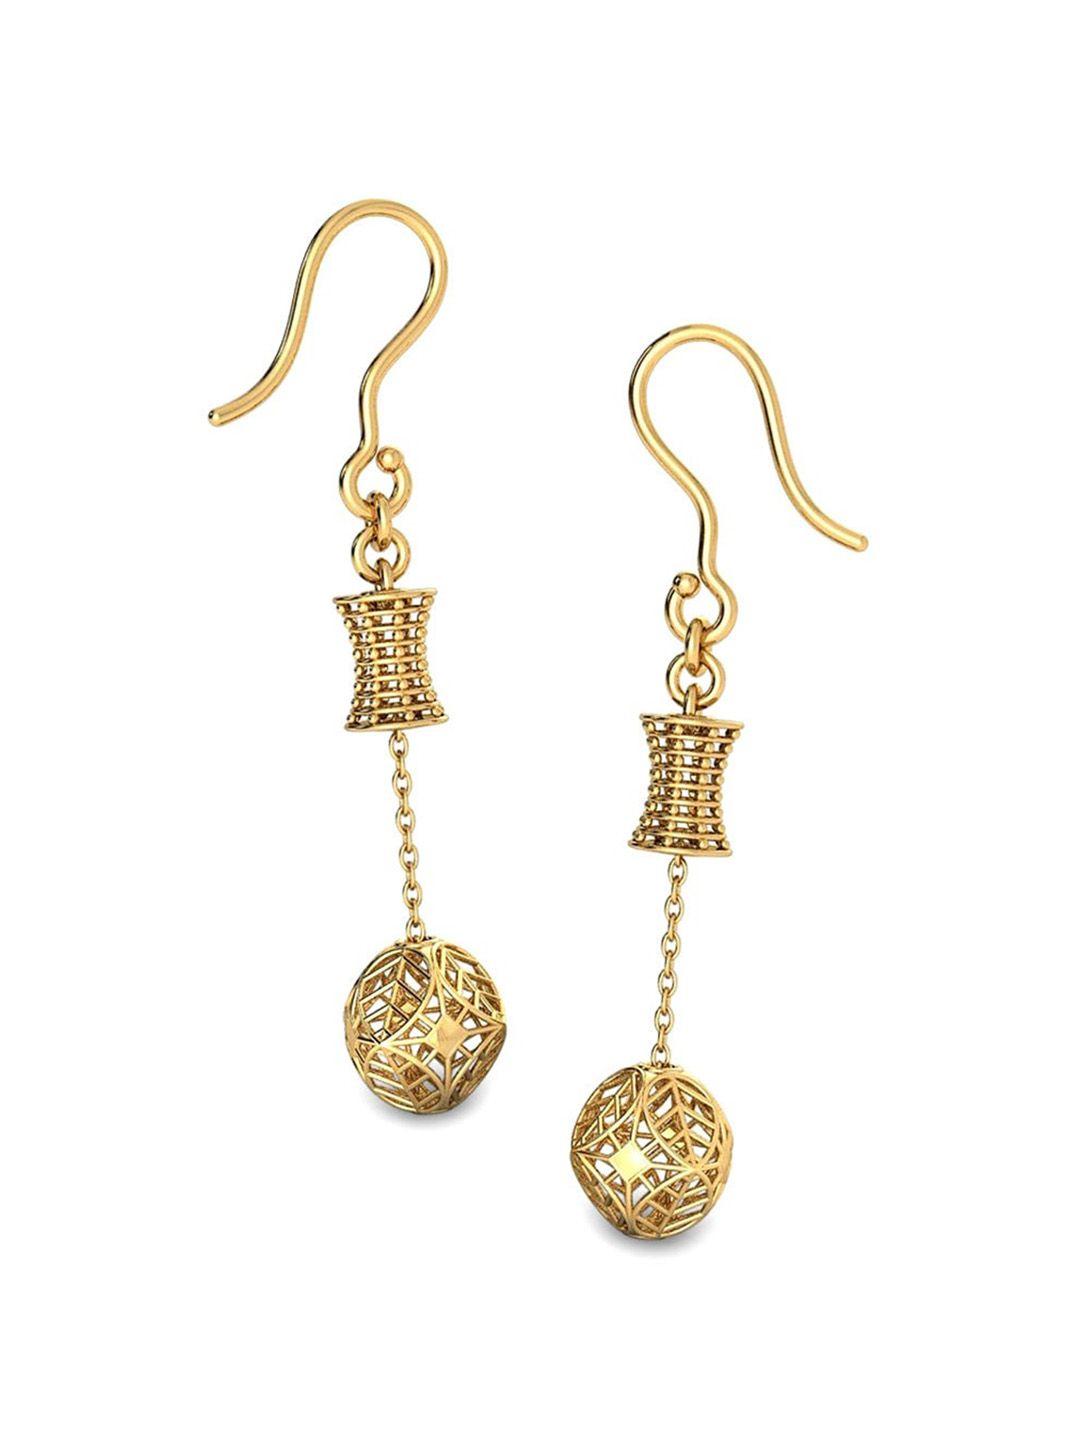 candere a kalyan jewellers company 18kt gold bis hallmark earrings-2.4gm